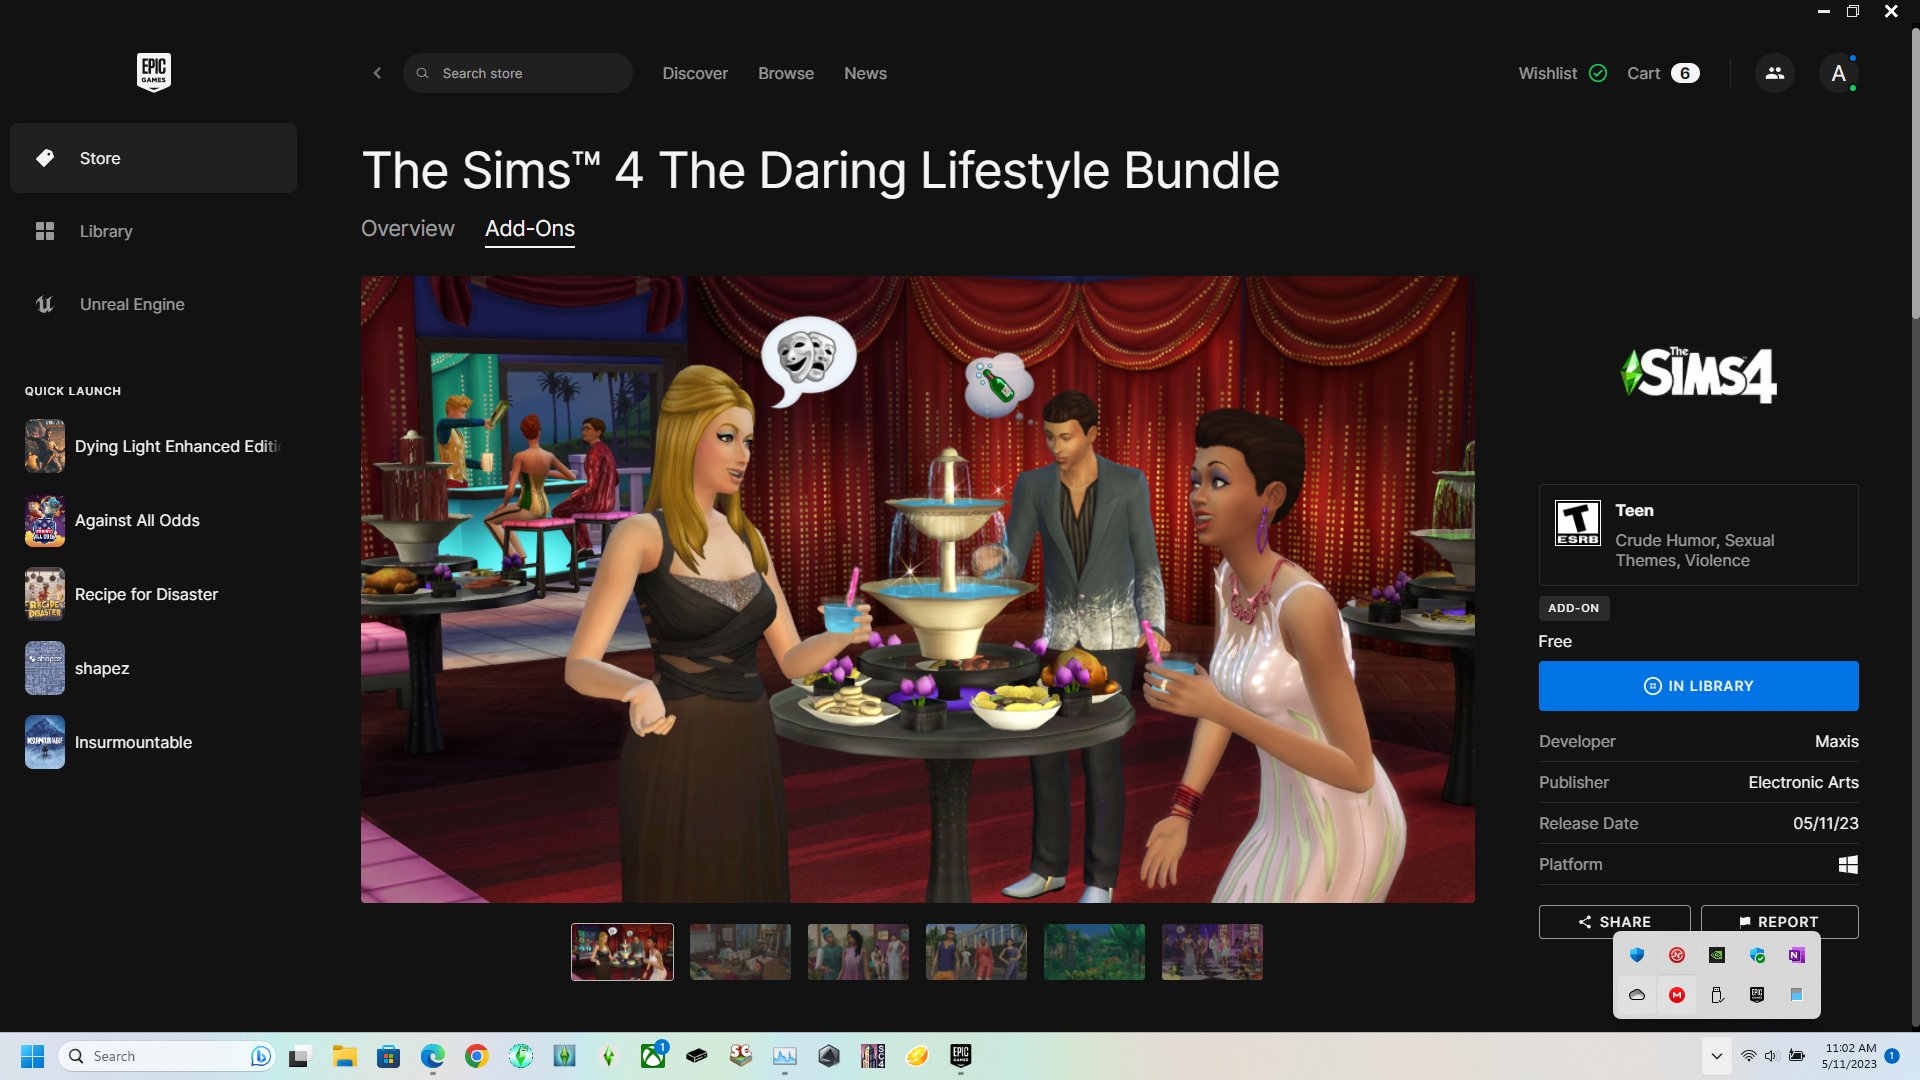 Epic Games - Free Sims 4 Packs - The Sims Resource - Blog